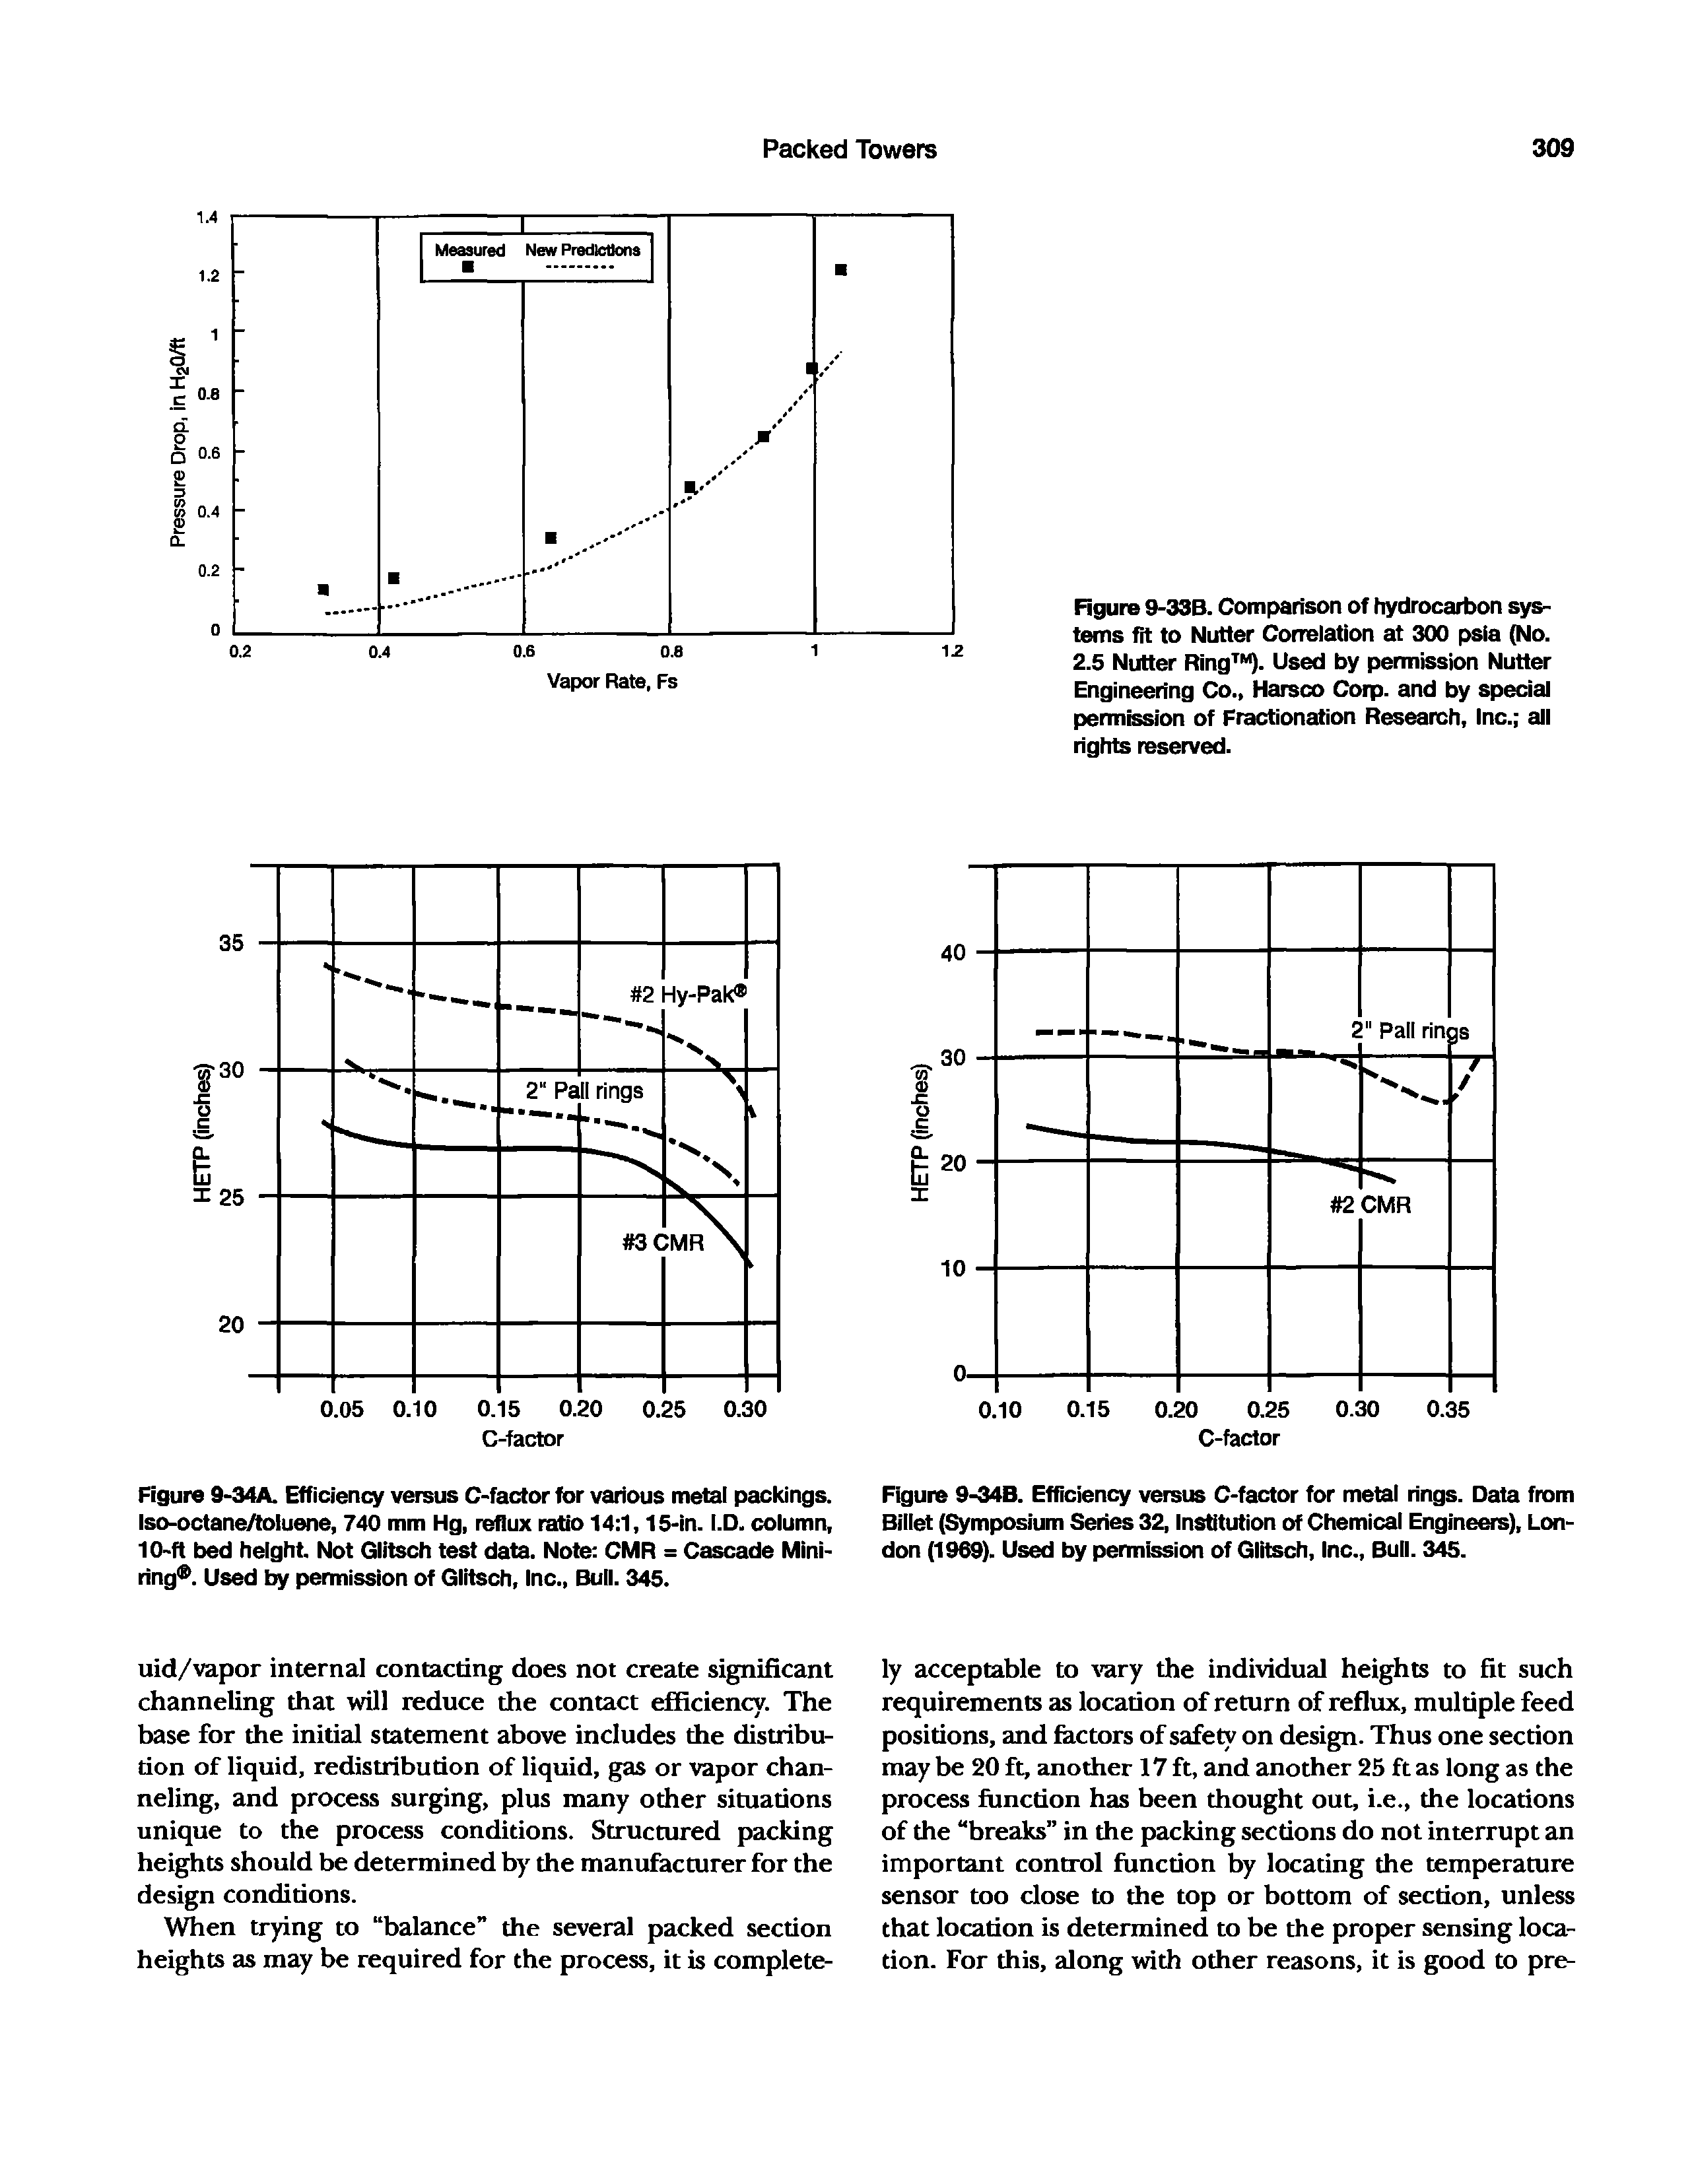 Figure 9-34A. Efficiency versus C-factor for various metal packings. Iso-octane/toluene, 740 mm Hg, reflux ratio 14 1,15-in. I.D. column, 10-ft bed height. Not Glitsch test data. Note CMR = Cascade Mini-ring . Used by permission of Glitsch, Inc., Bull. 345.